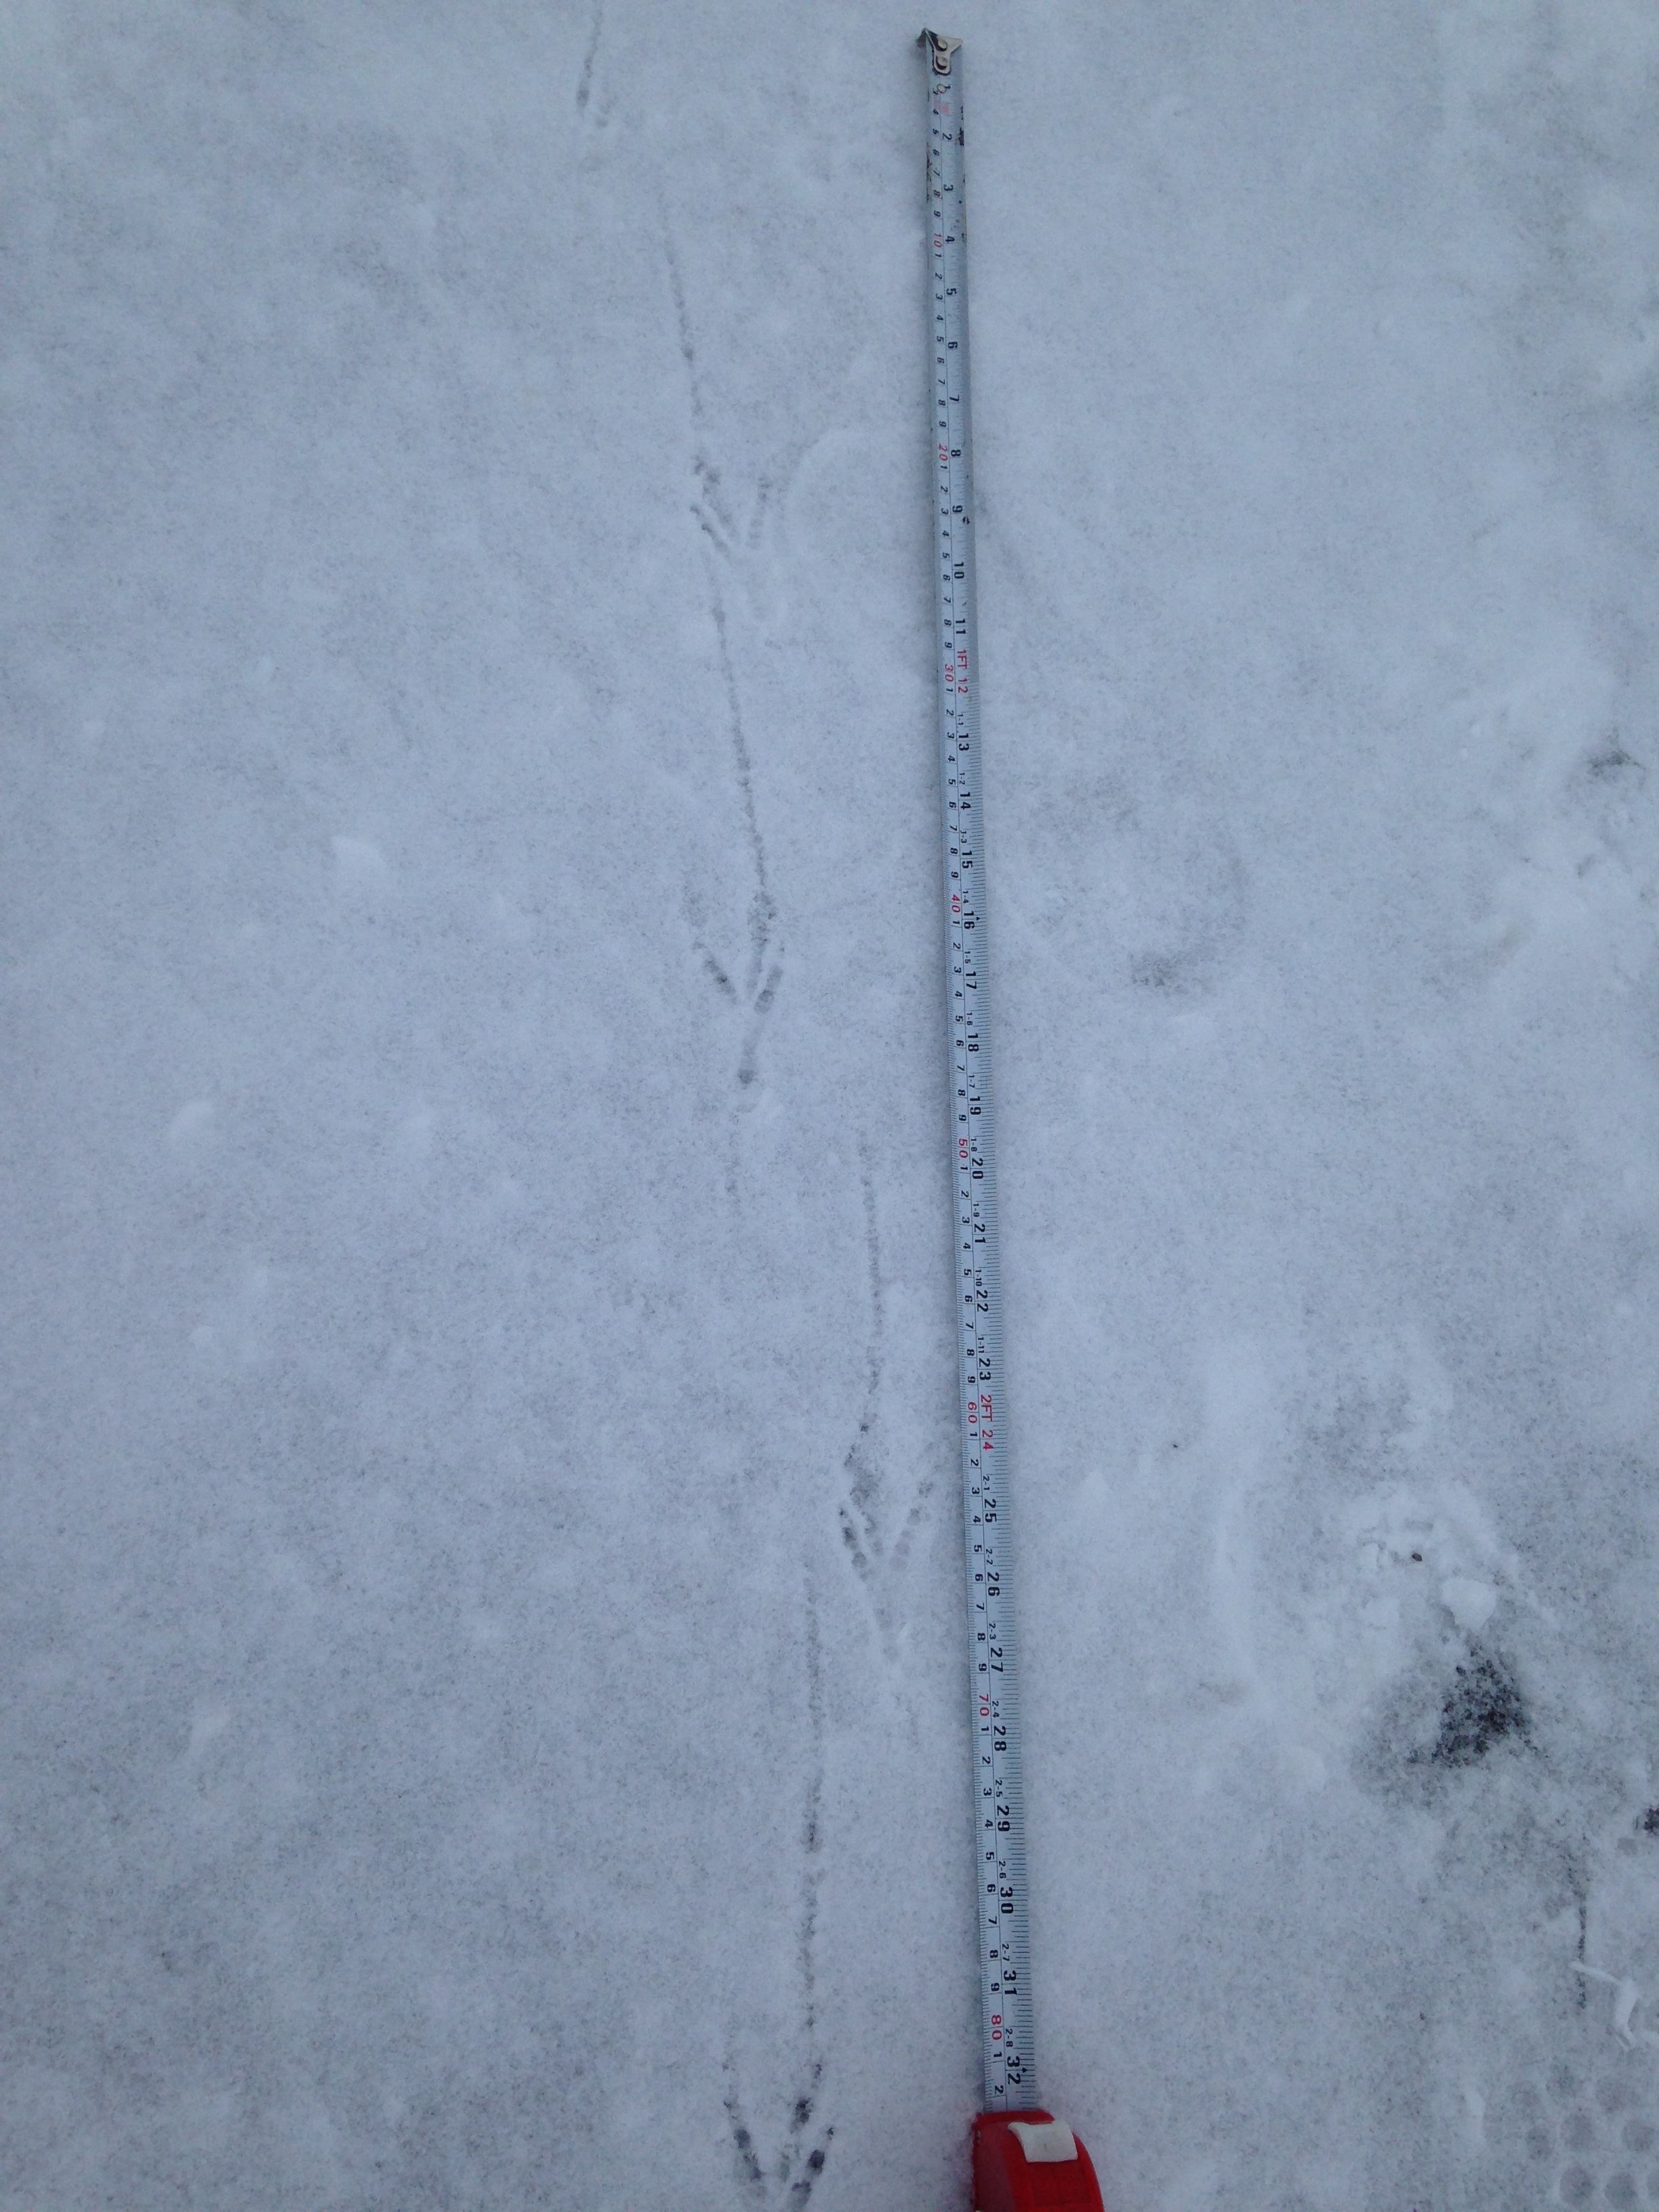 Trail @, with 9 cm track lengths, and ~22 cm stride length